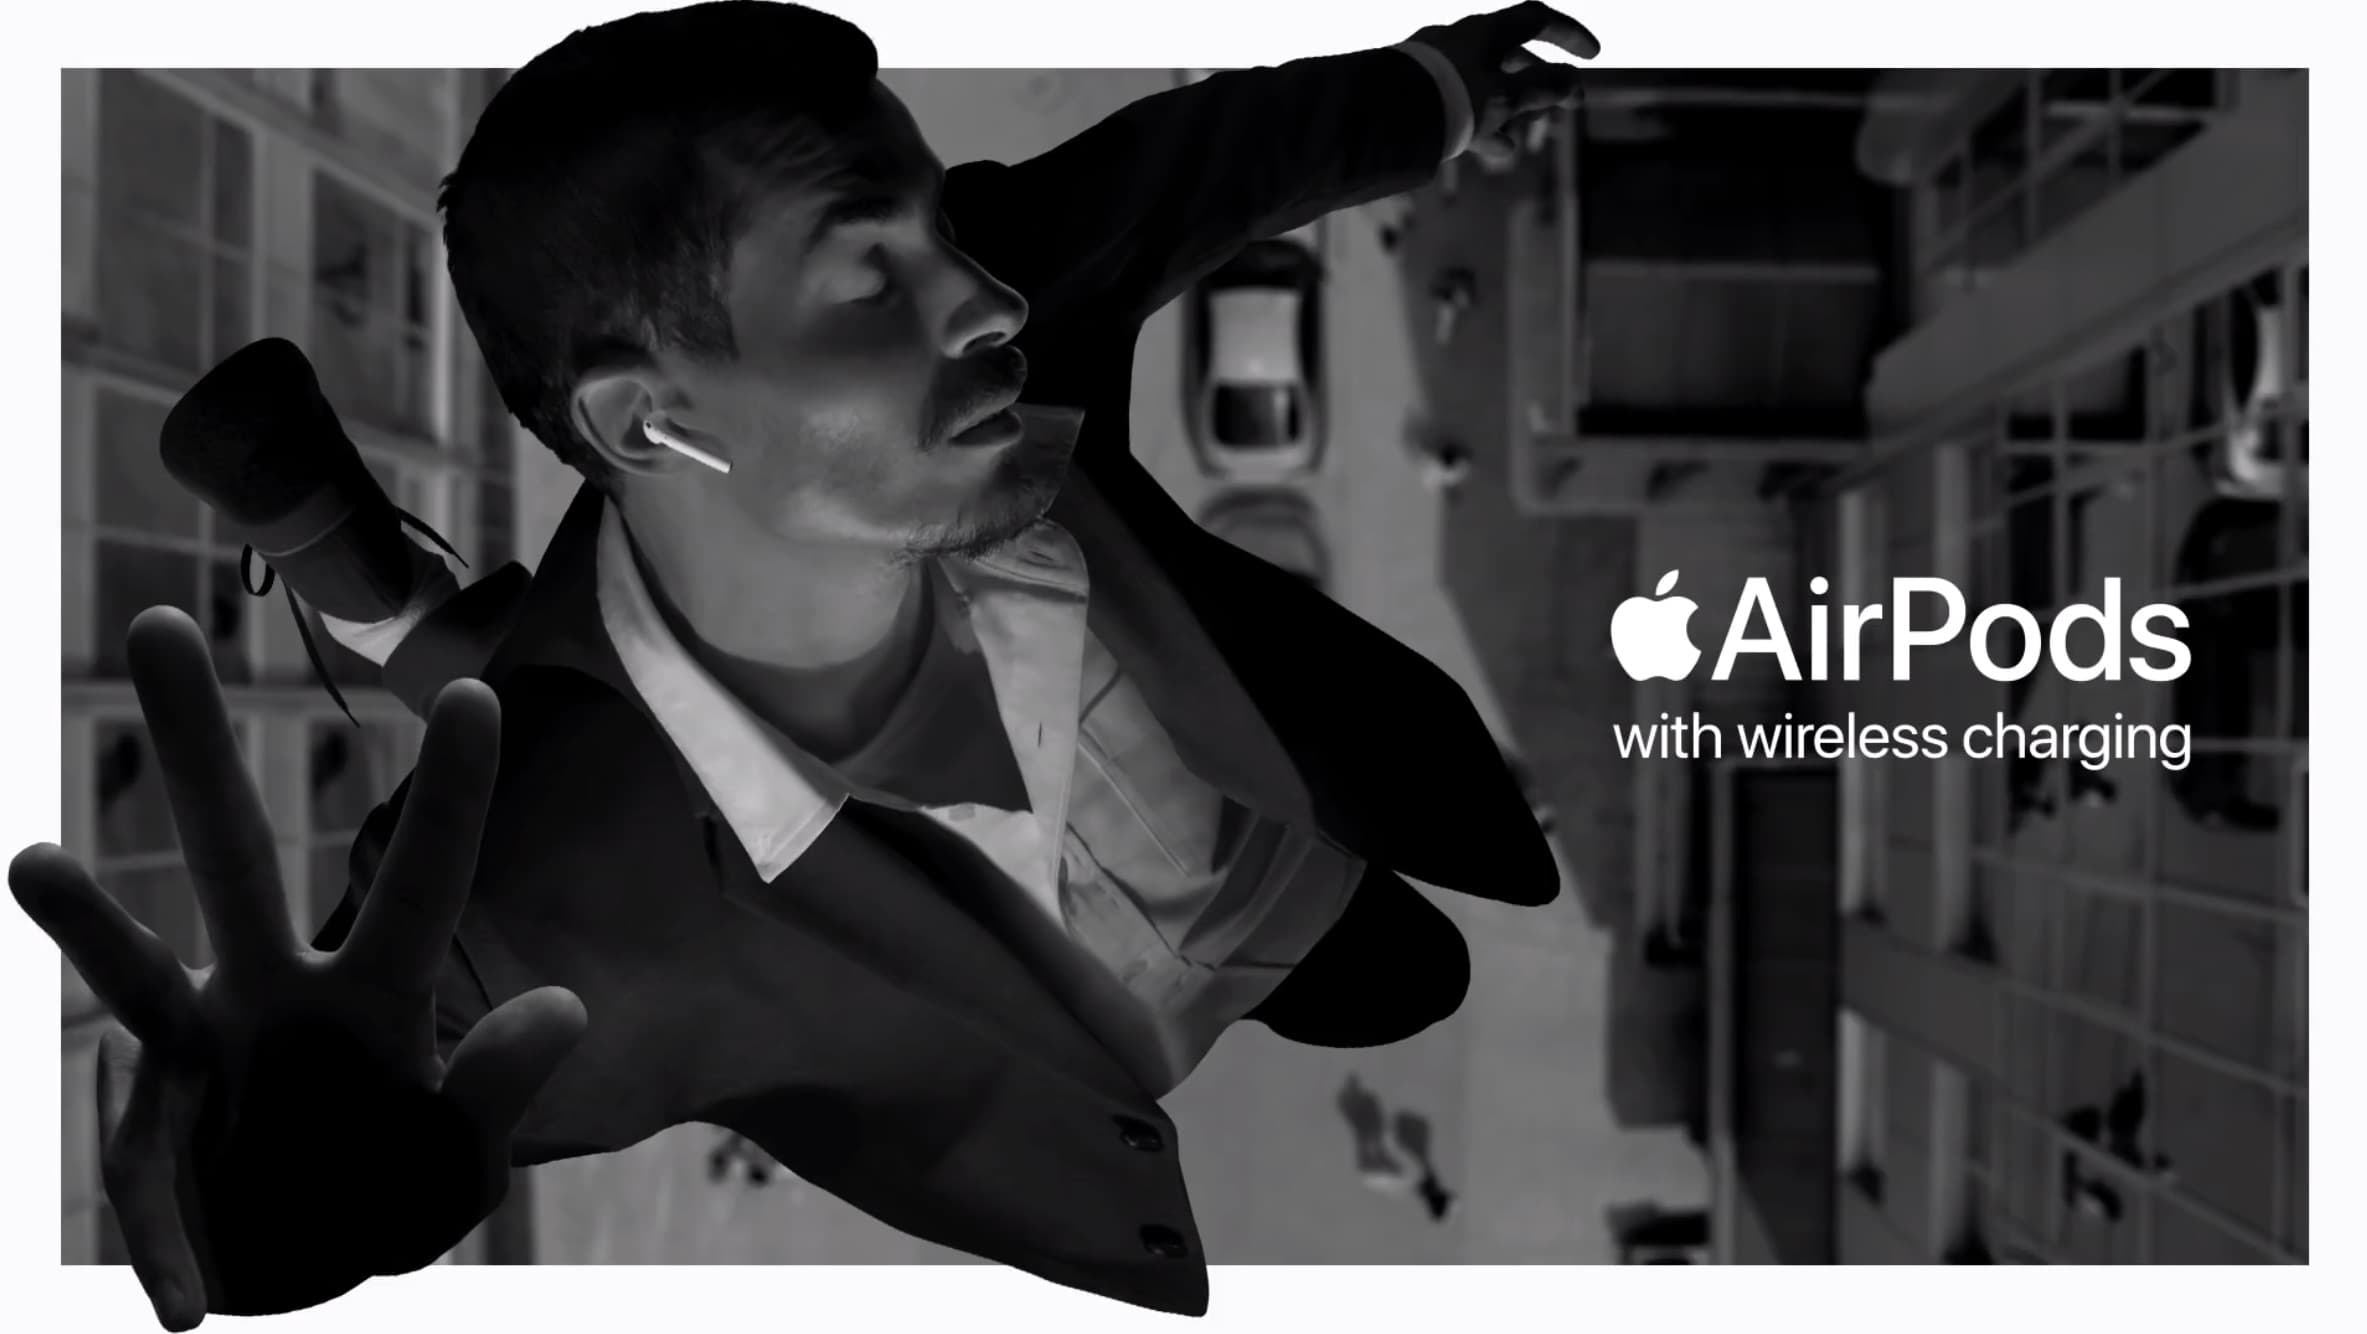 Bounce ad for AirPods1